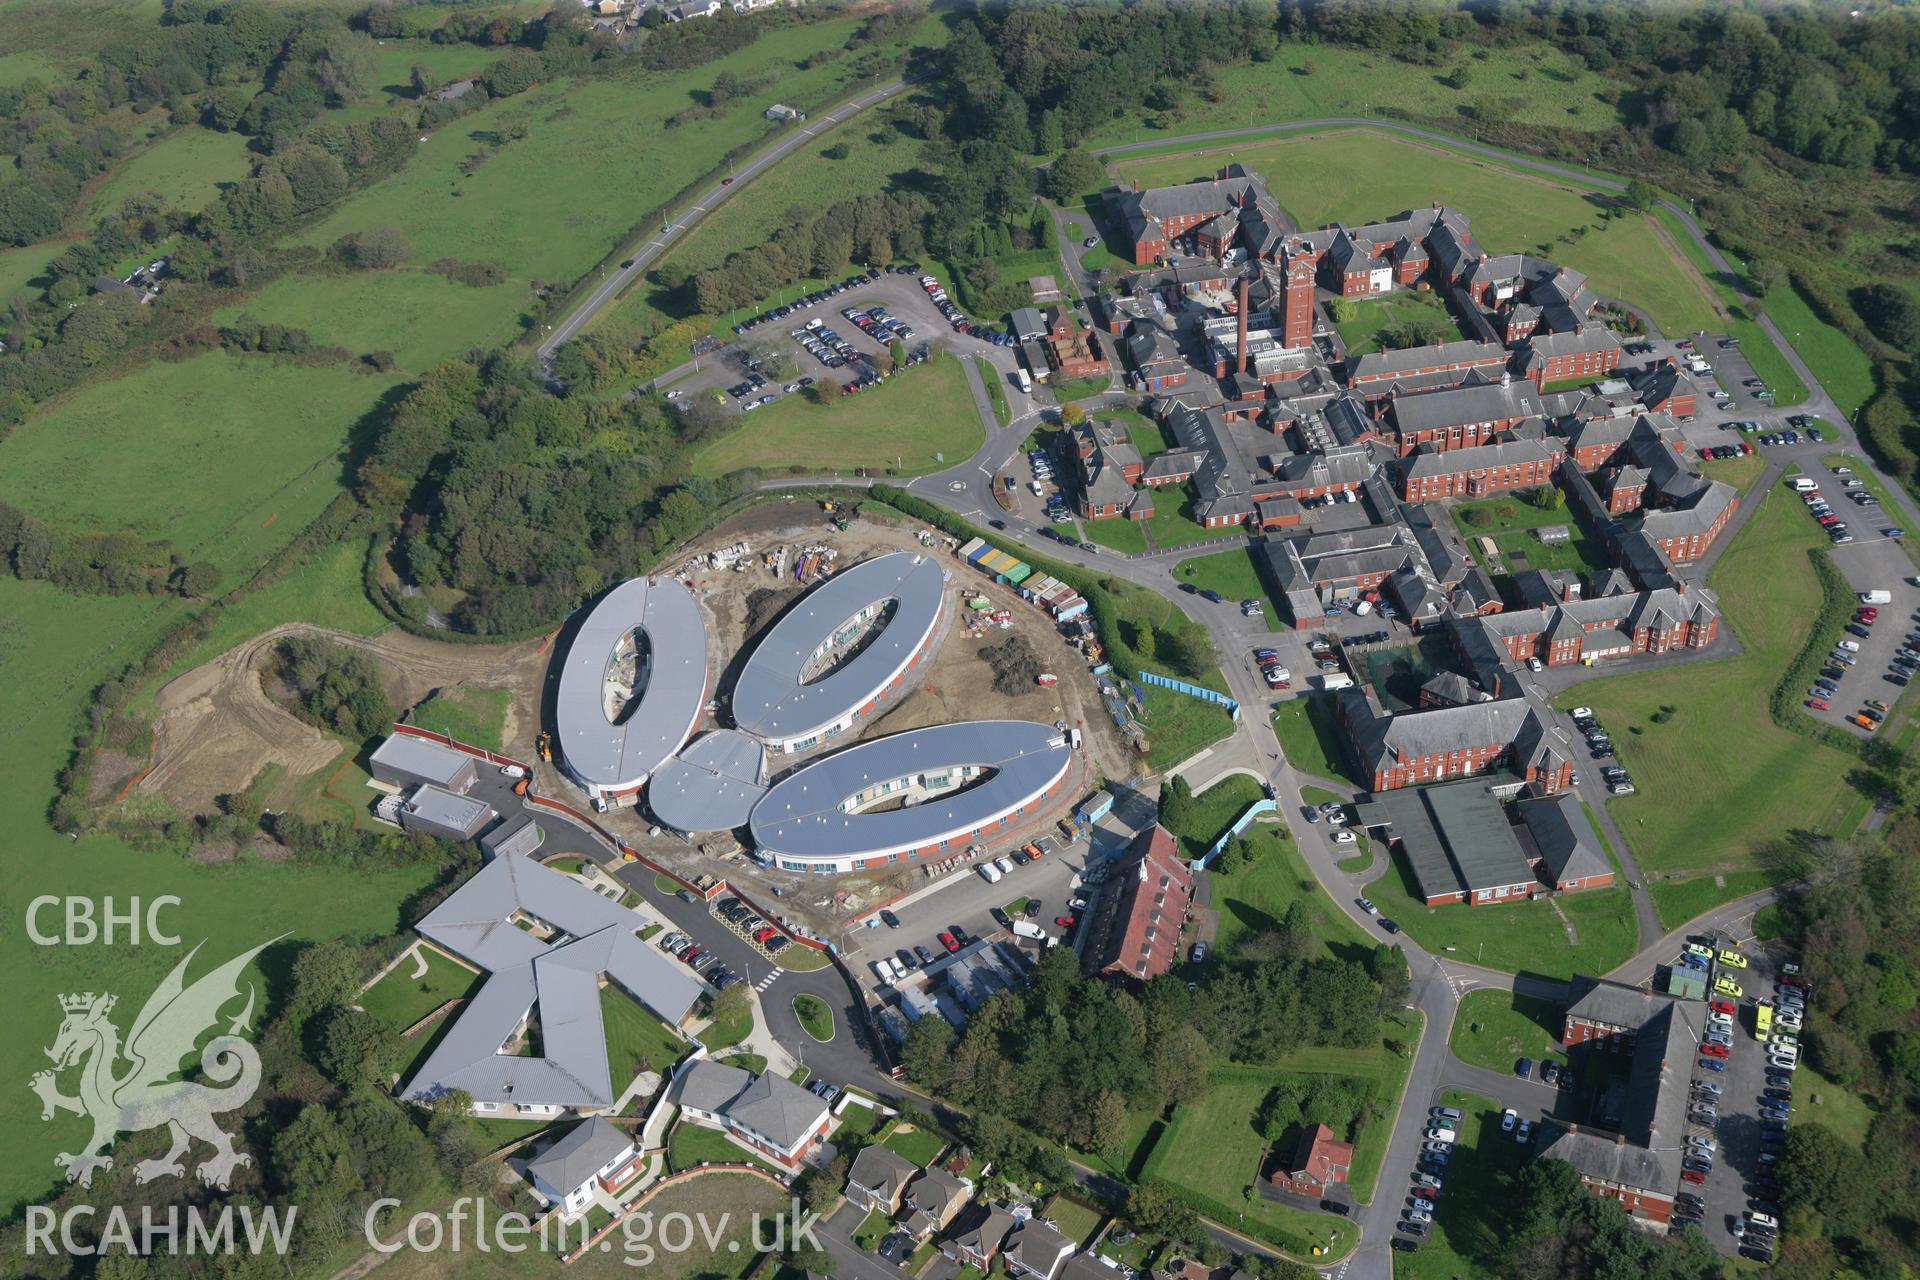 RCAHMW colour oblique photograph of Cefn Coed Hospital with new dementia unit. Taken by Toby Driver and Oliver Davies on 28/09/2011.